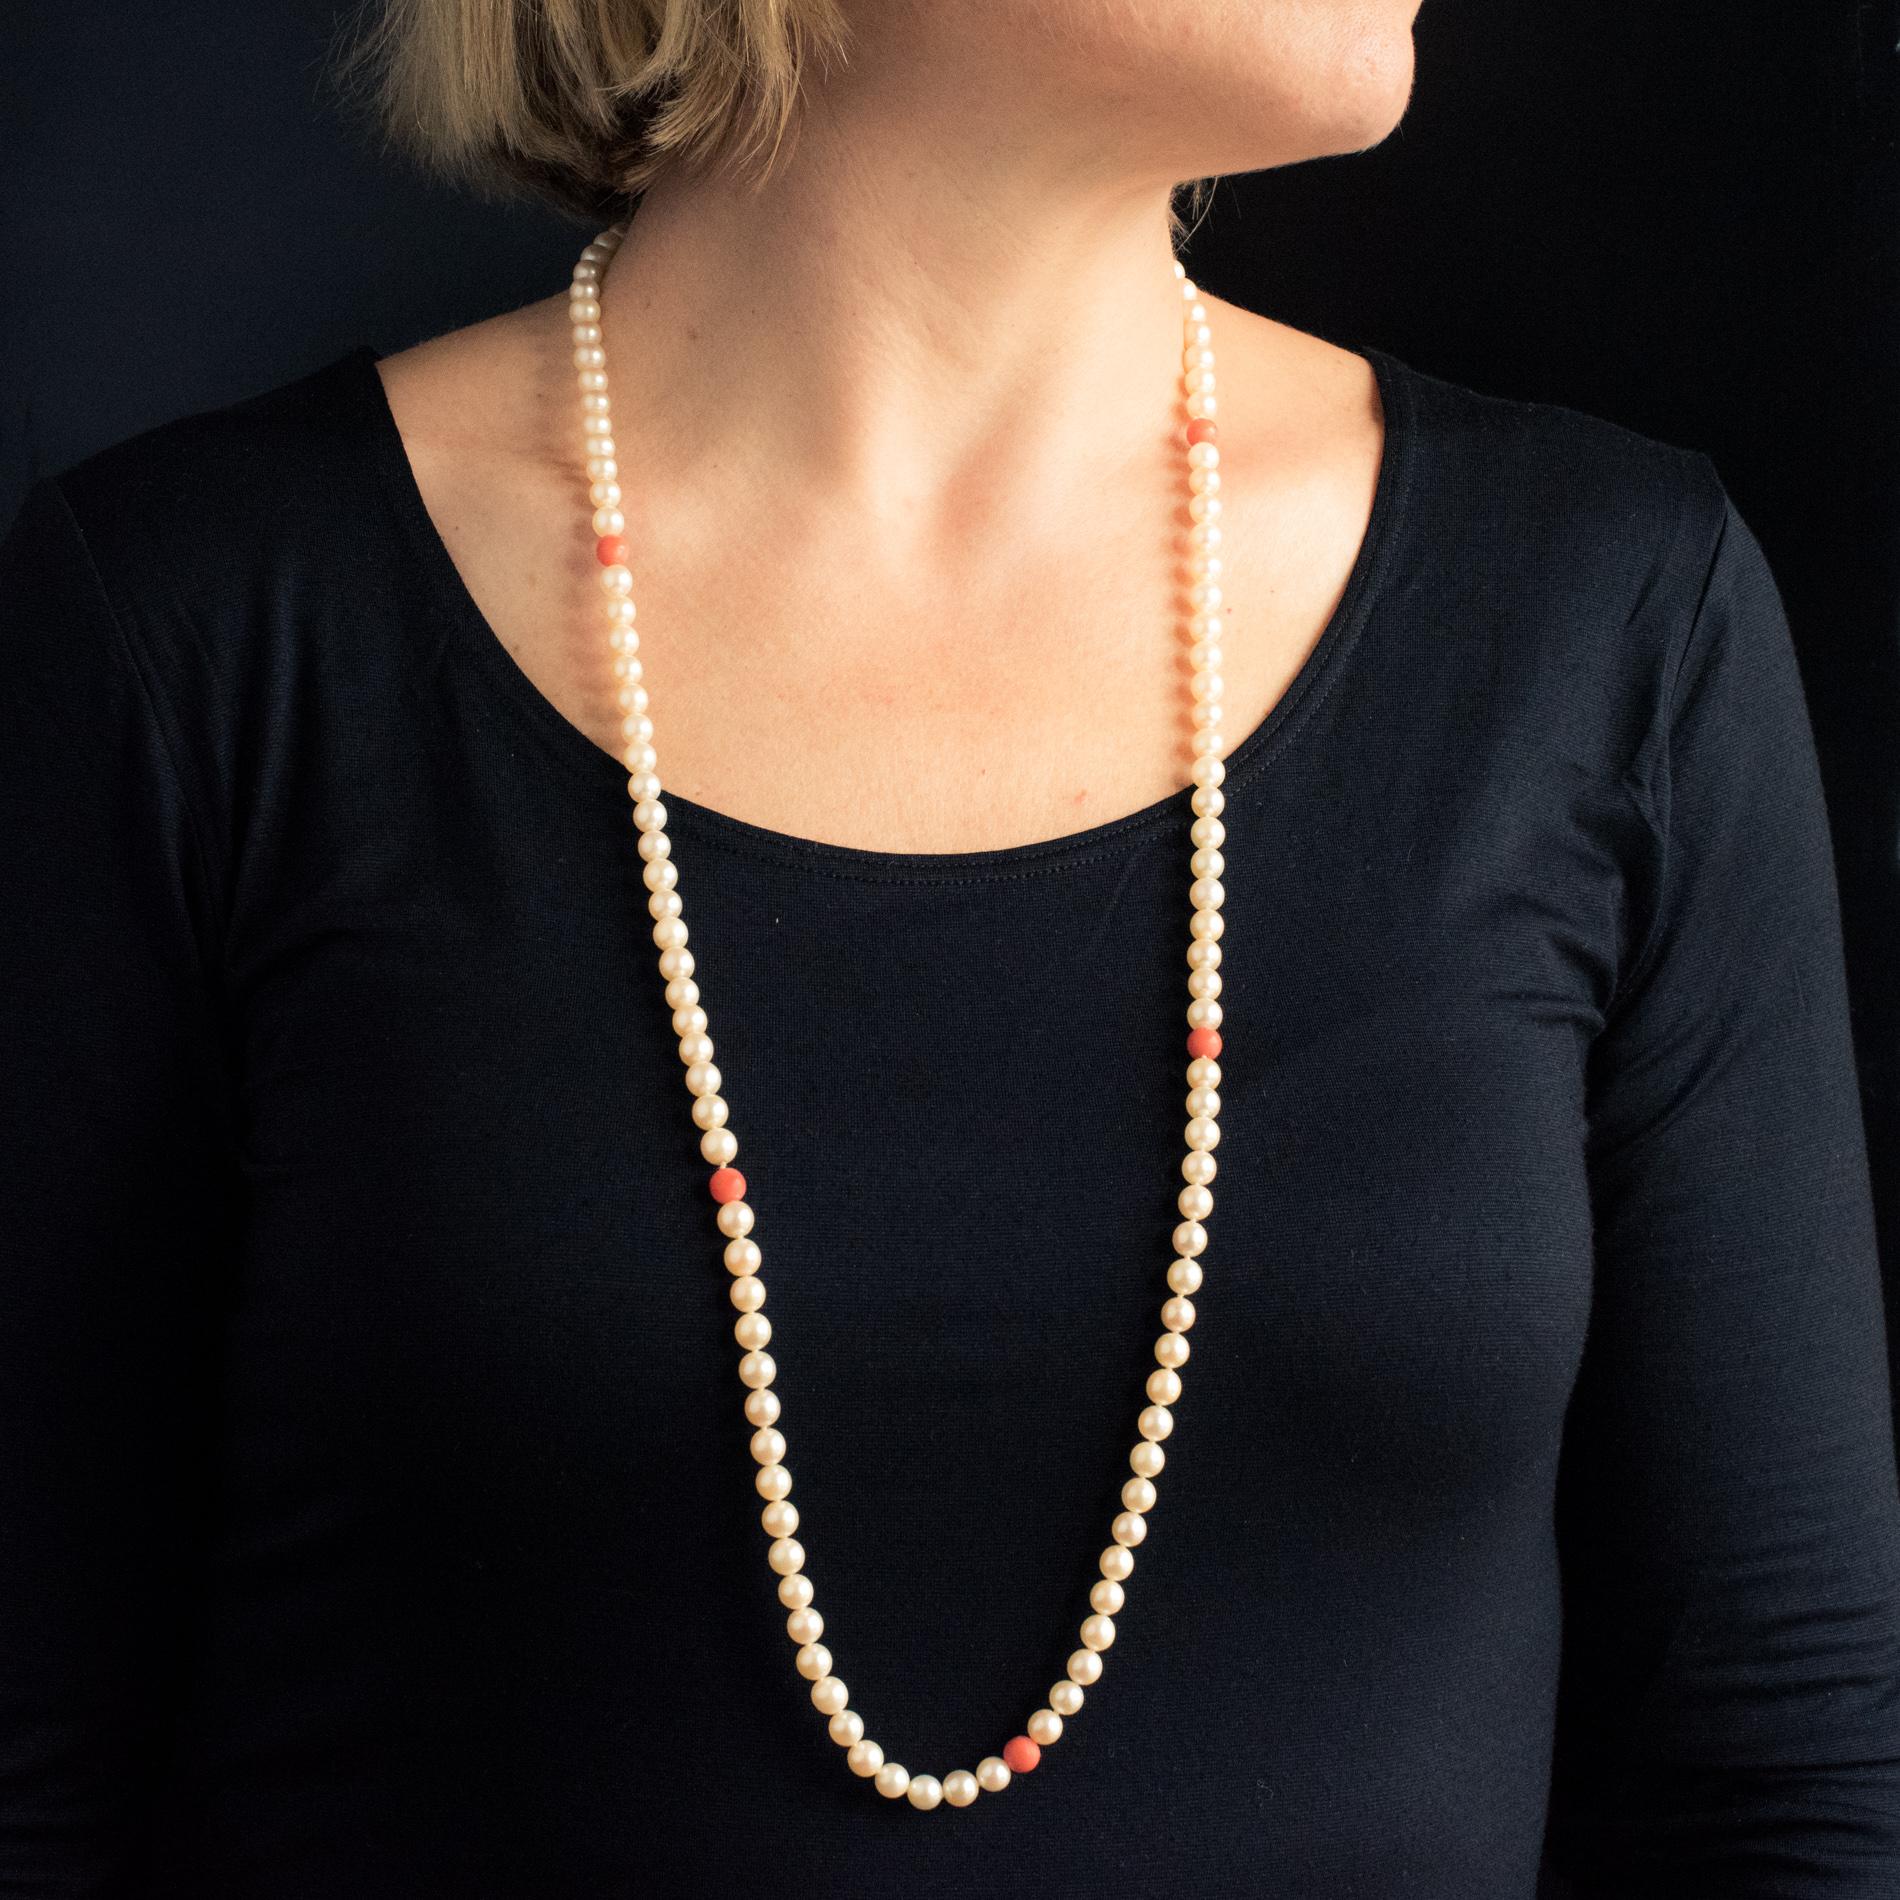 This splendid long necklace is made of cultured white orient pearls, punctually separated by coral pearls.
Diameter of the pearls: approximately 6.5 / 7 mm.
Total length: 90 cm approximately.
Total weight of the jewel: 53,8 g